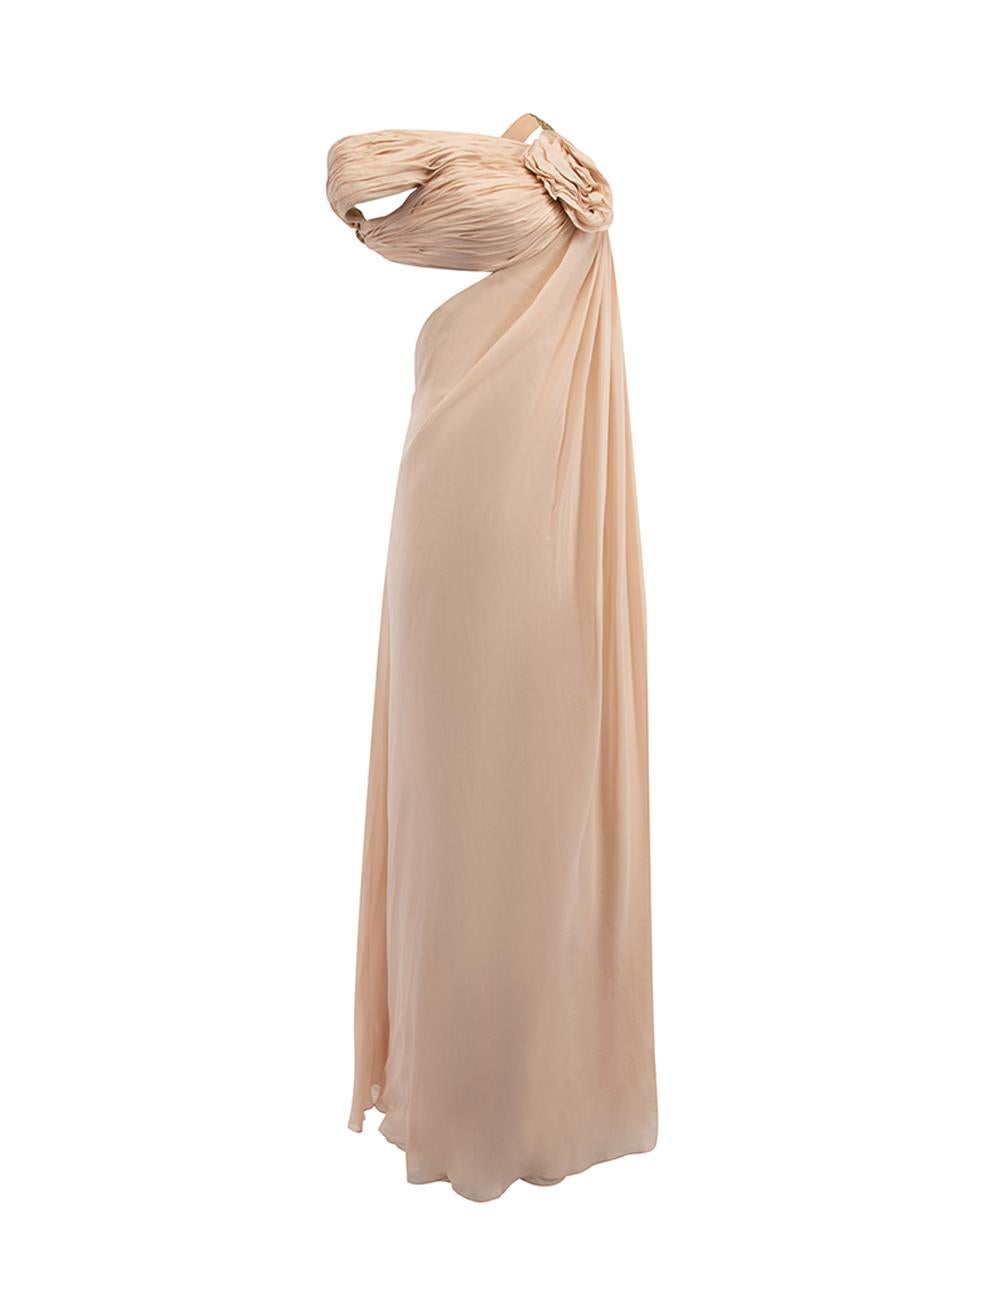 CONDITION is Very good. Minimal wear to dress is evident. There are marks at the bottom of dress on this used Marchesa designer resale item. Details Pink Silk Maxi gown Asymmetric one shoulder Embellished mirror straps with clasp closure Flower